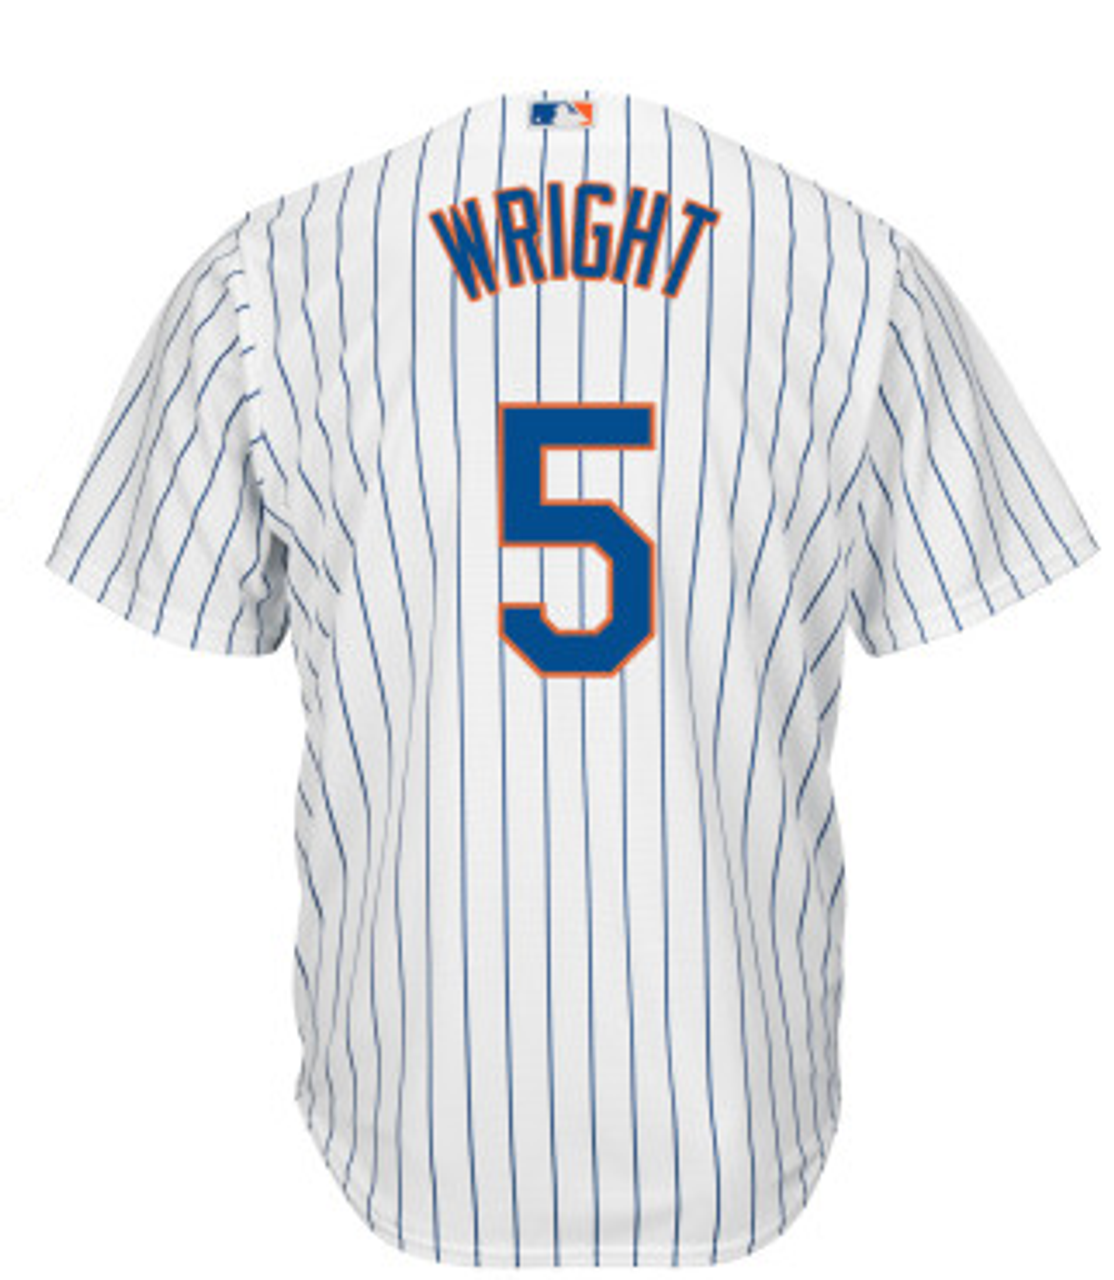 David Wright Youth Jersey - New York Mets Youth Home Jersey